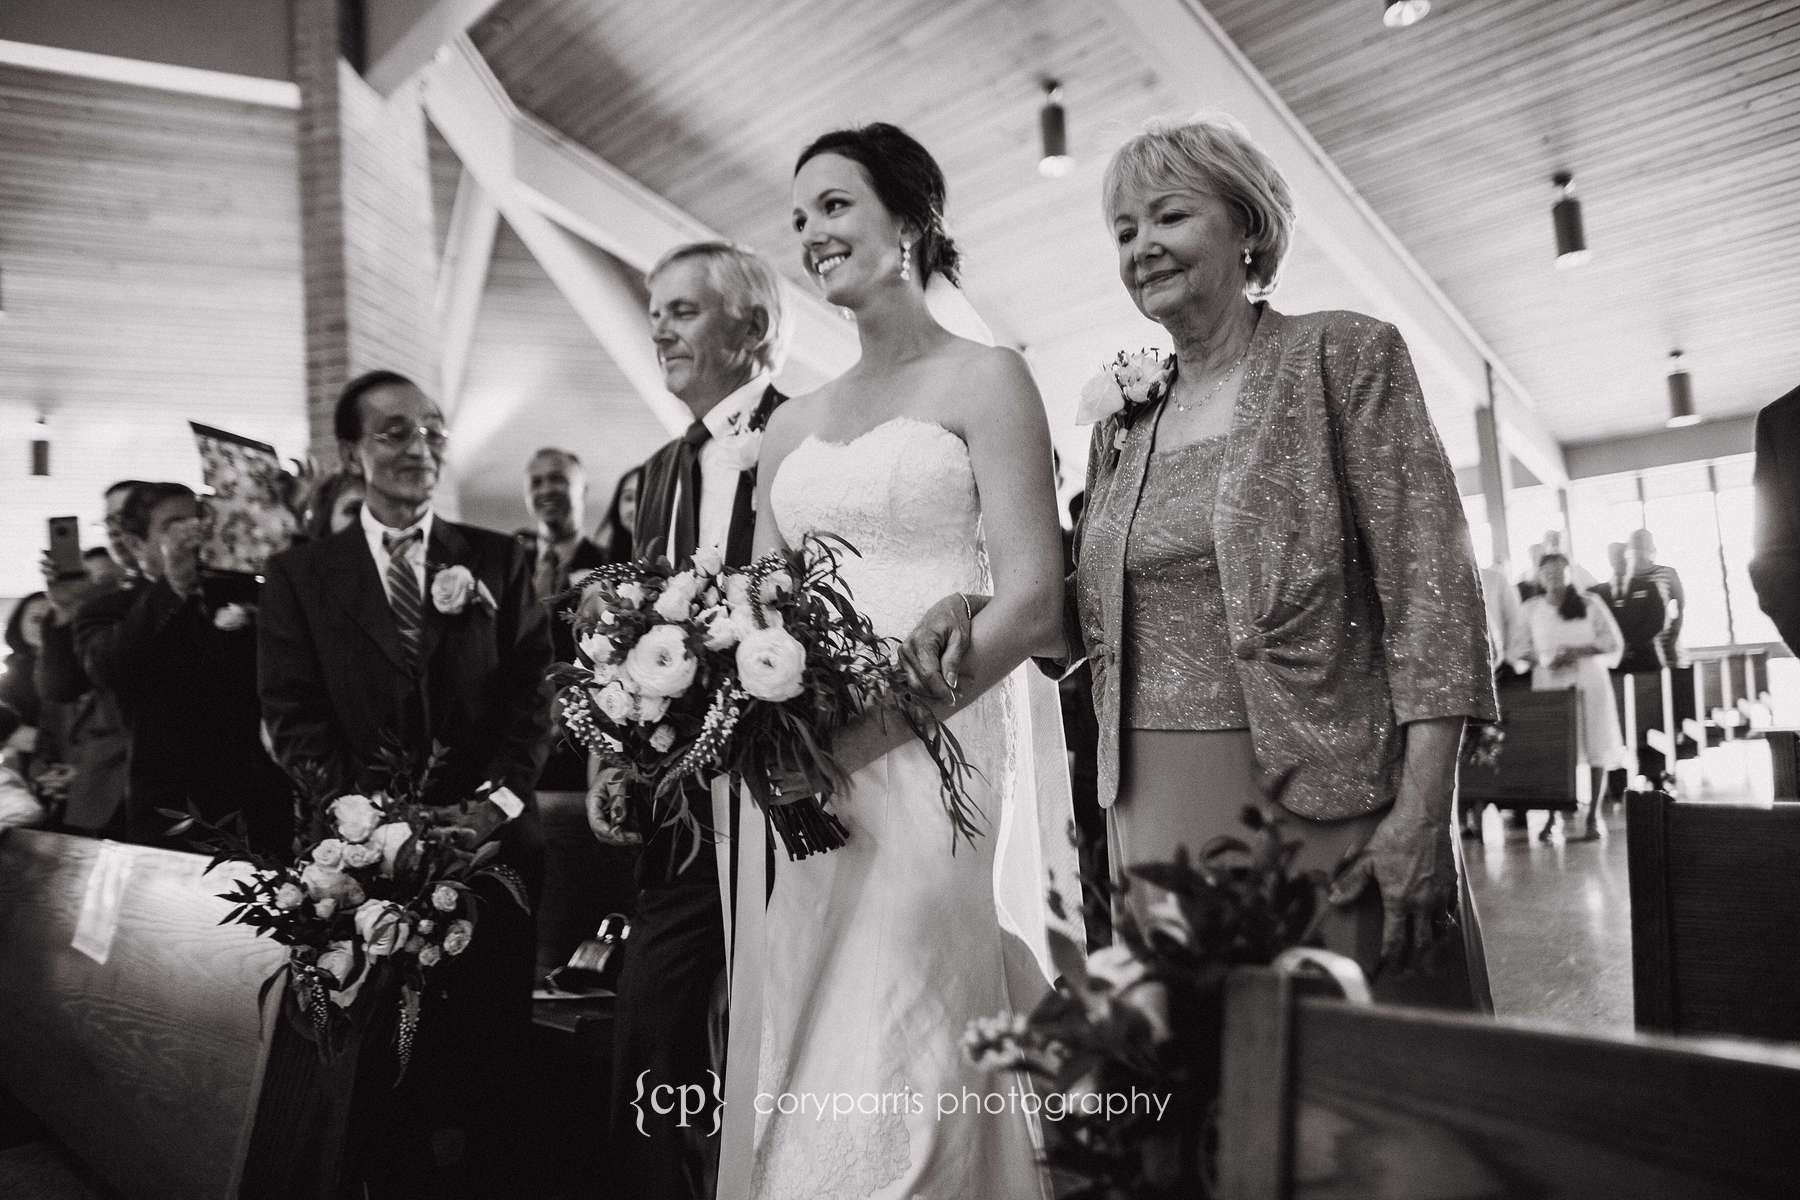  Angie walking down the aisle with her parents before the wedding. 